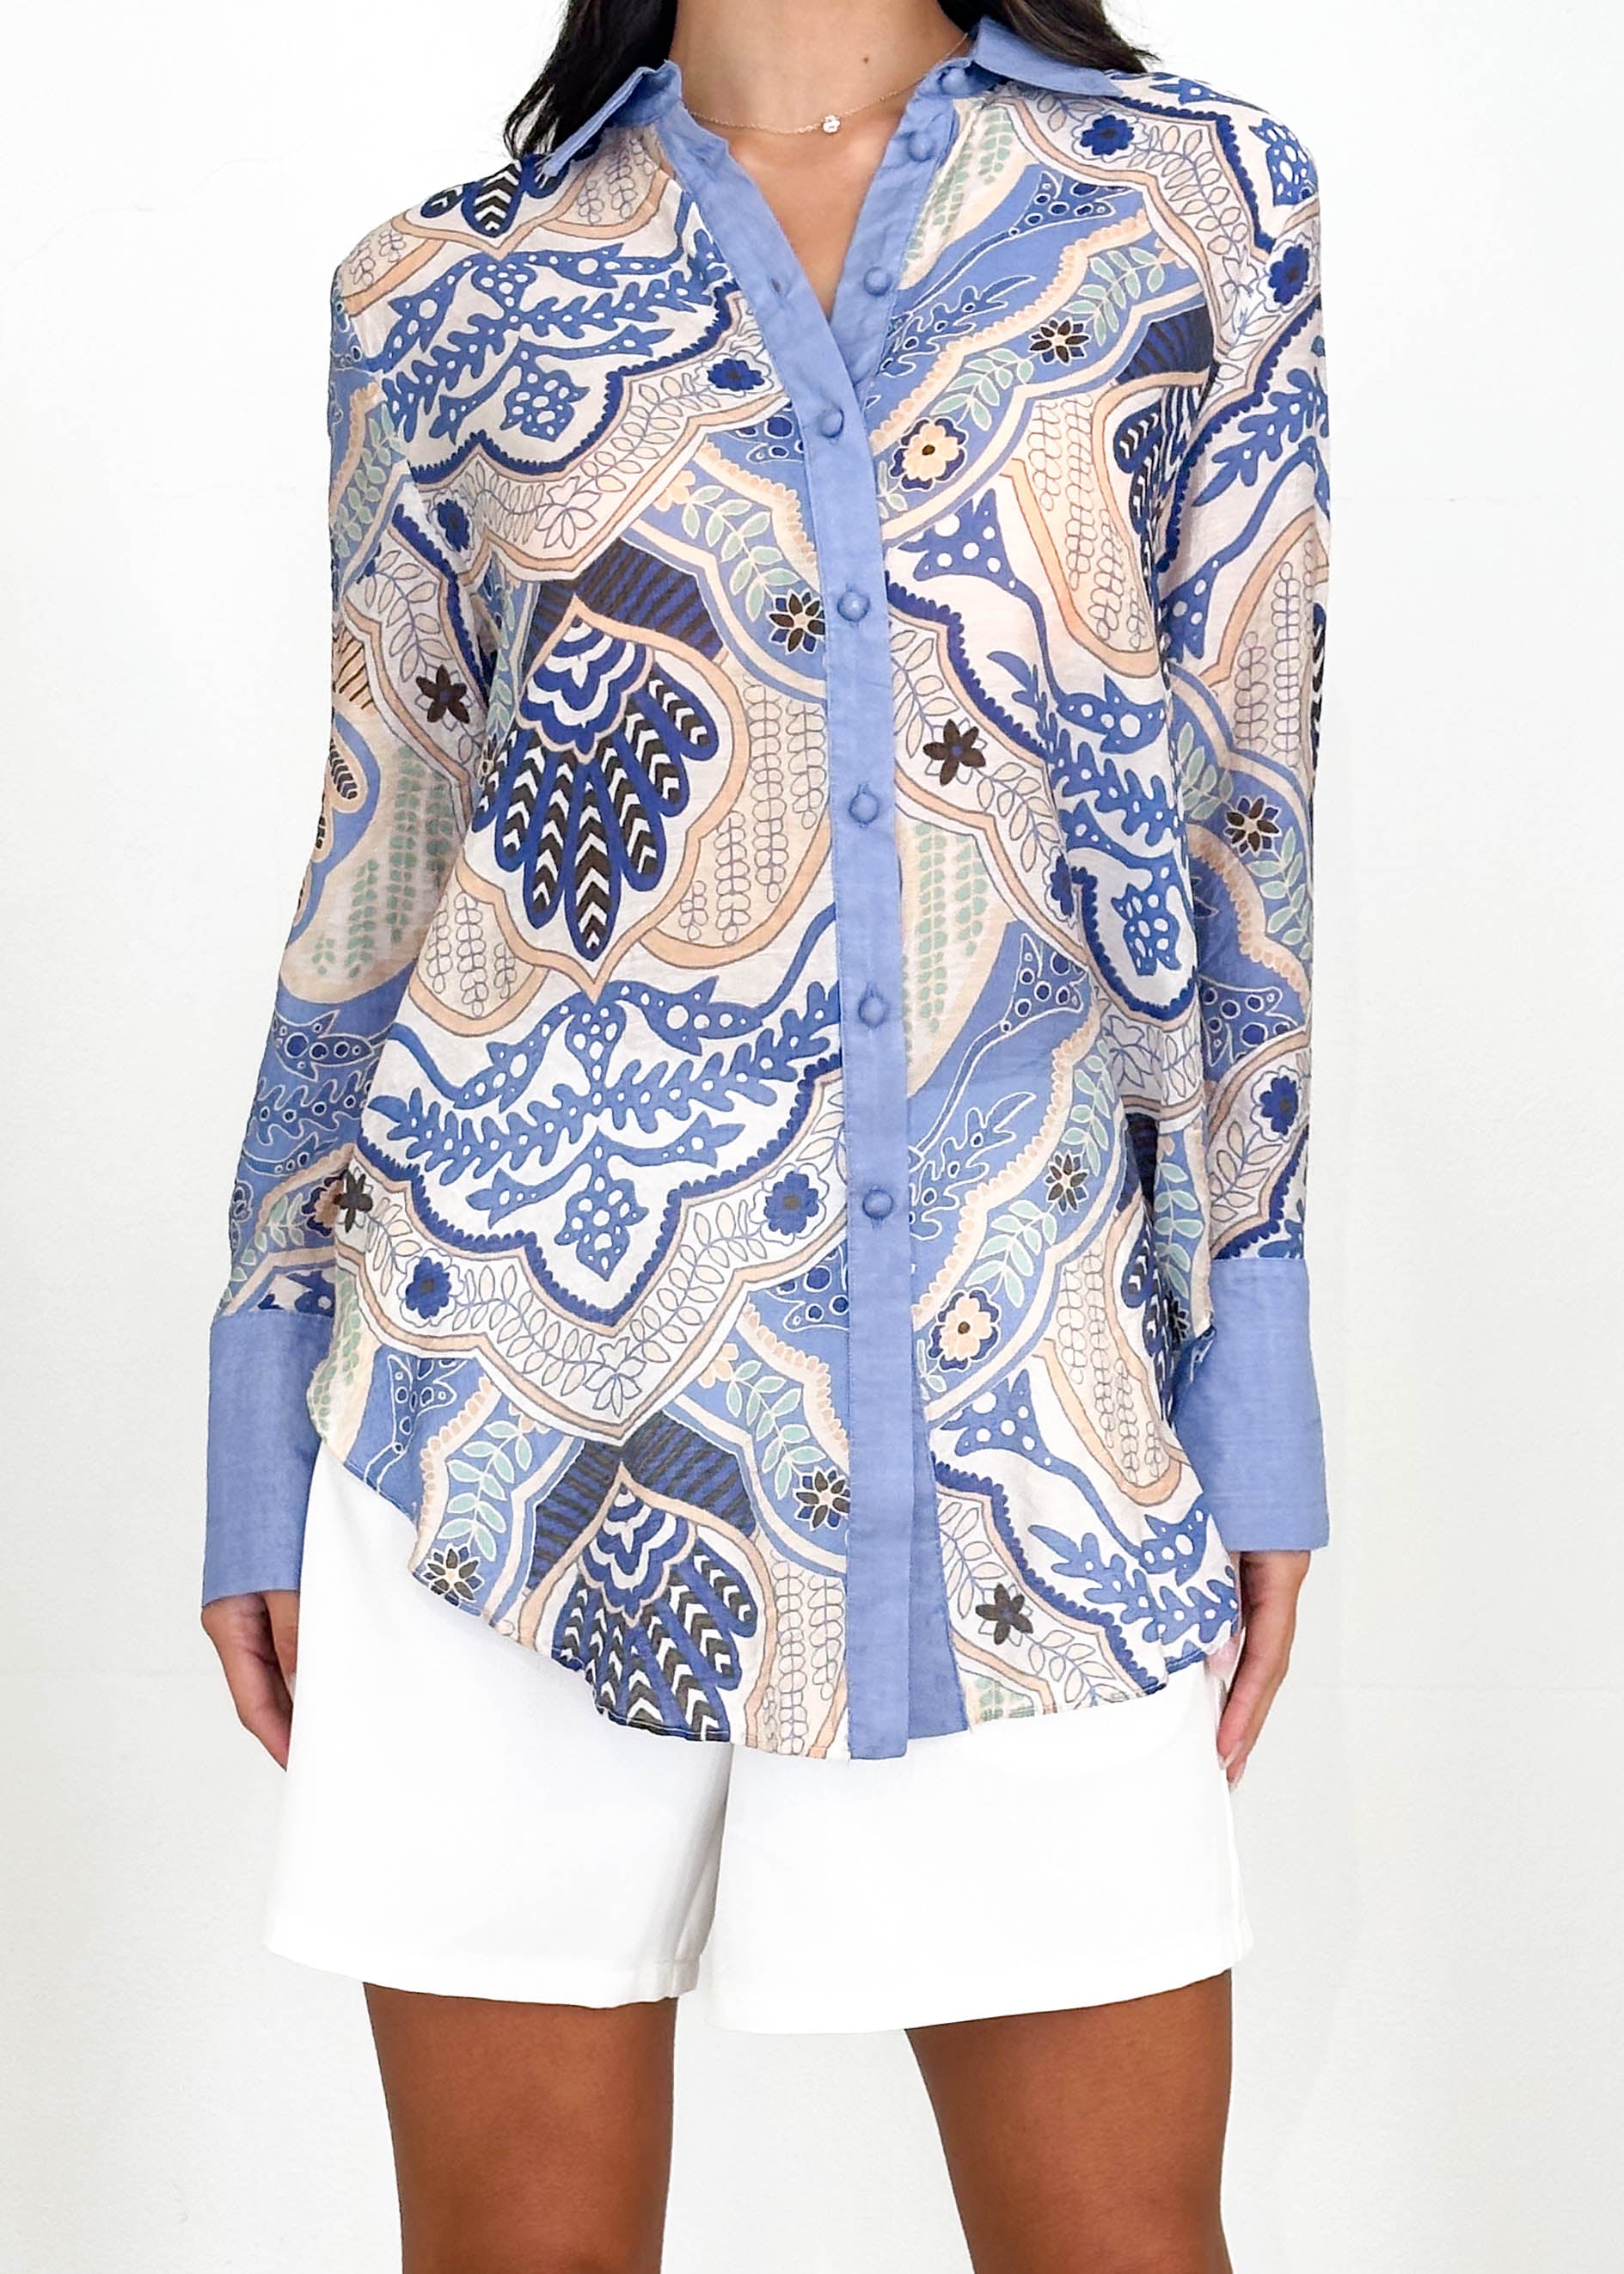 Gallet Shirt - Periwinkle Paisley